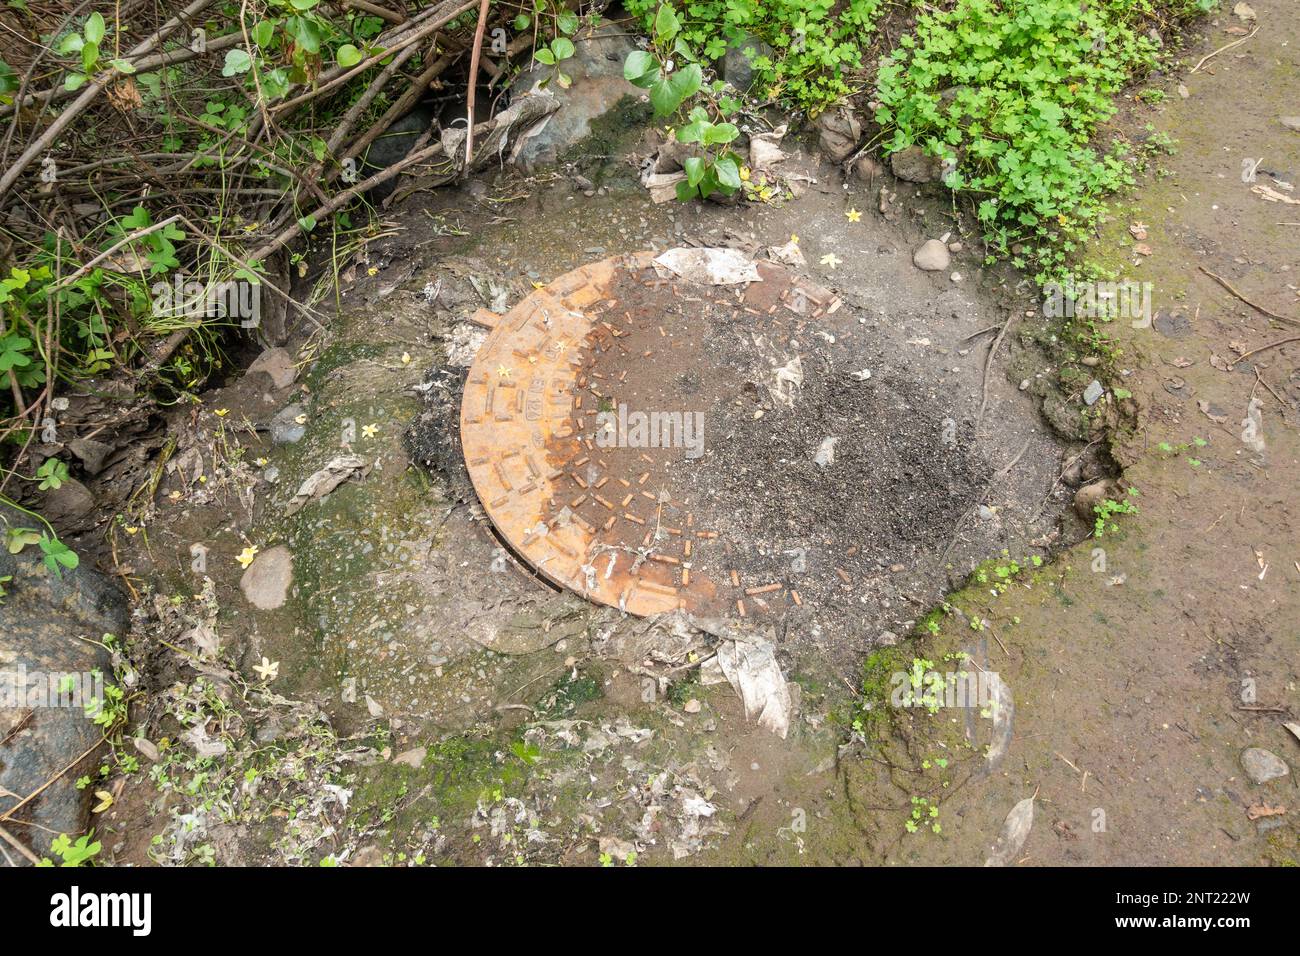 Partially lifted manhole, sewer cover near river following heavy rain. Eat.  Raw sewage and wipes around cover following overflow. Stock Photo